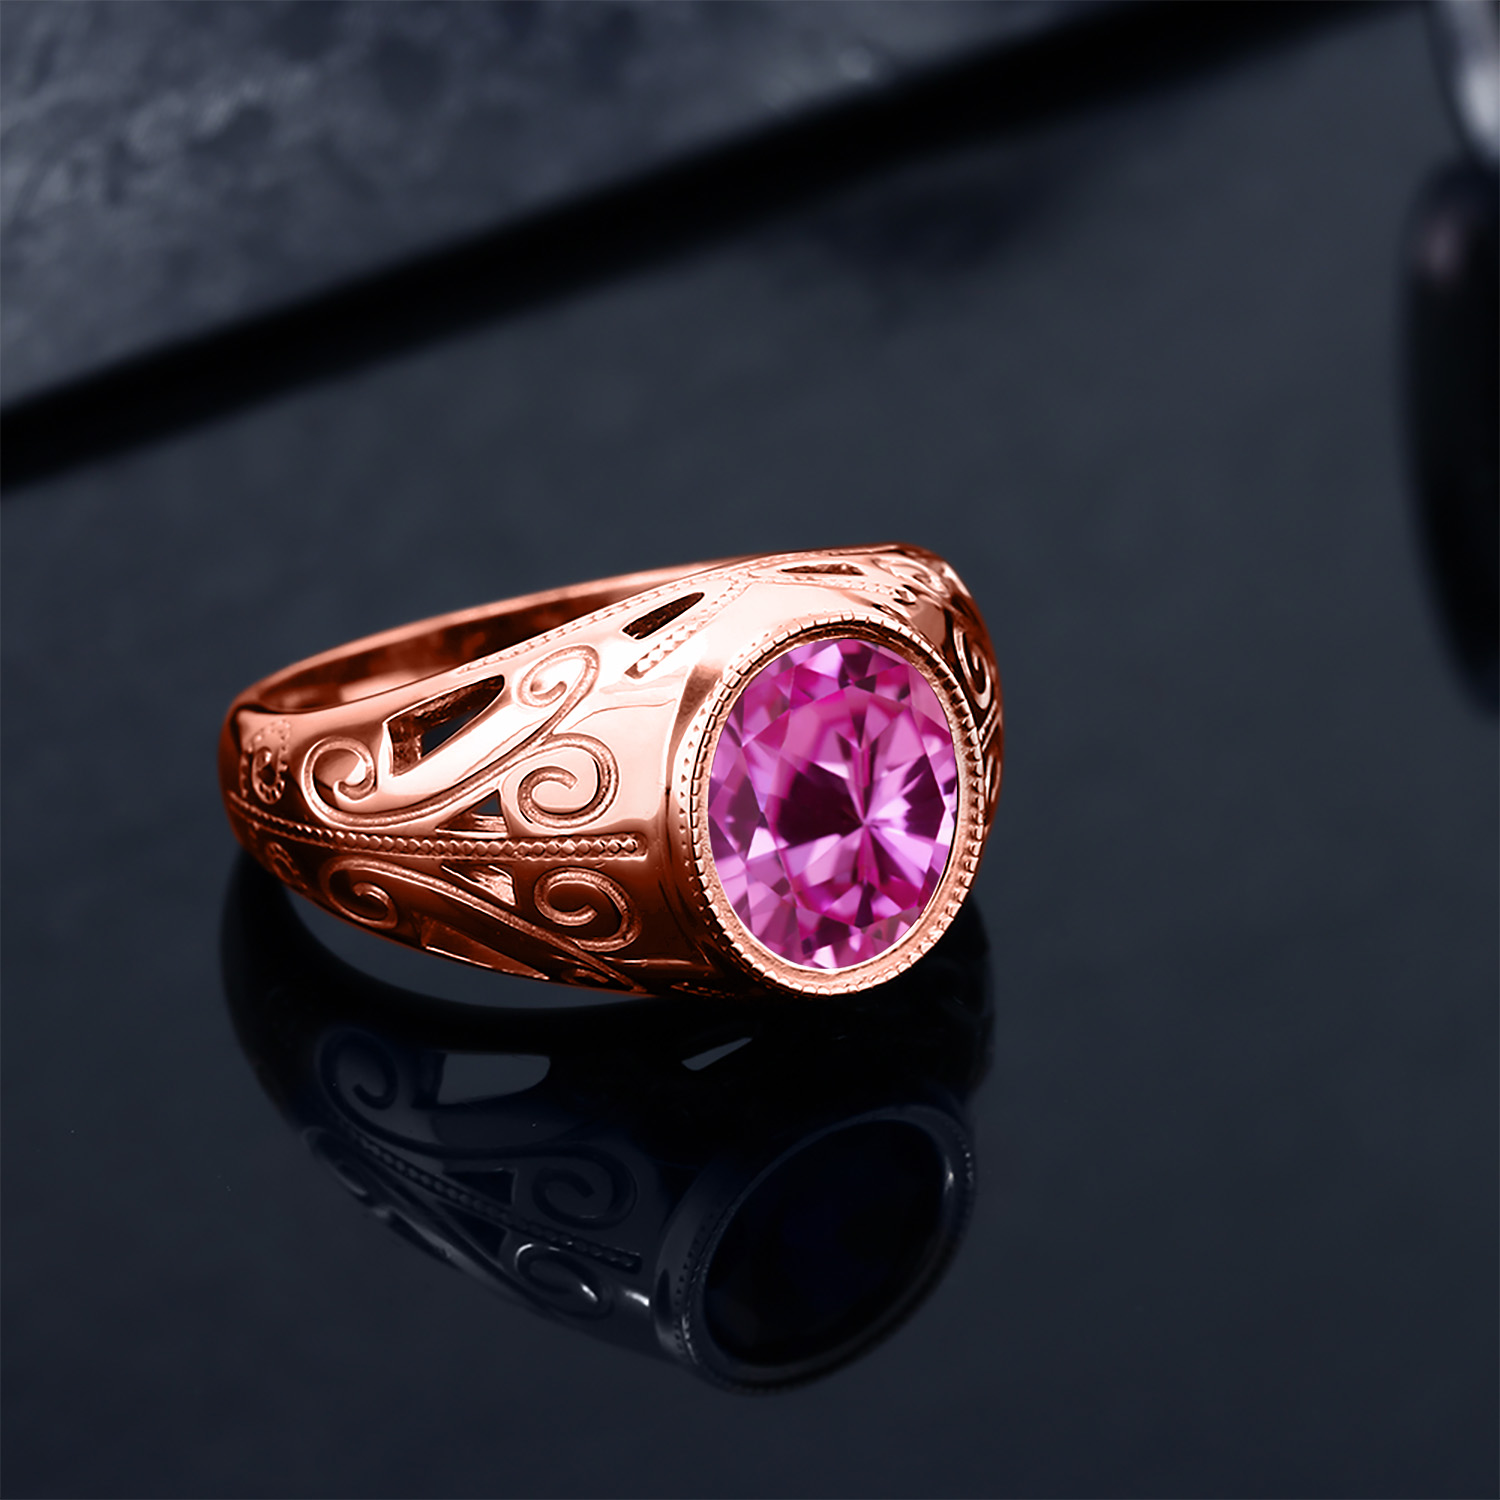 Gem Stone King 7.50 Ct Oval Pink Created Sapphire 18K Rose Gold Plated Silver Men's Ring